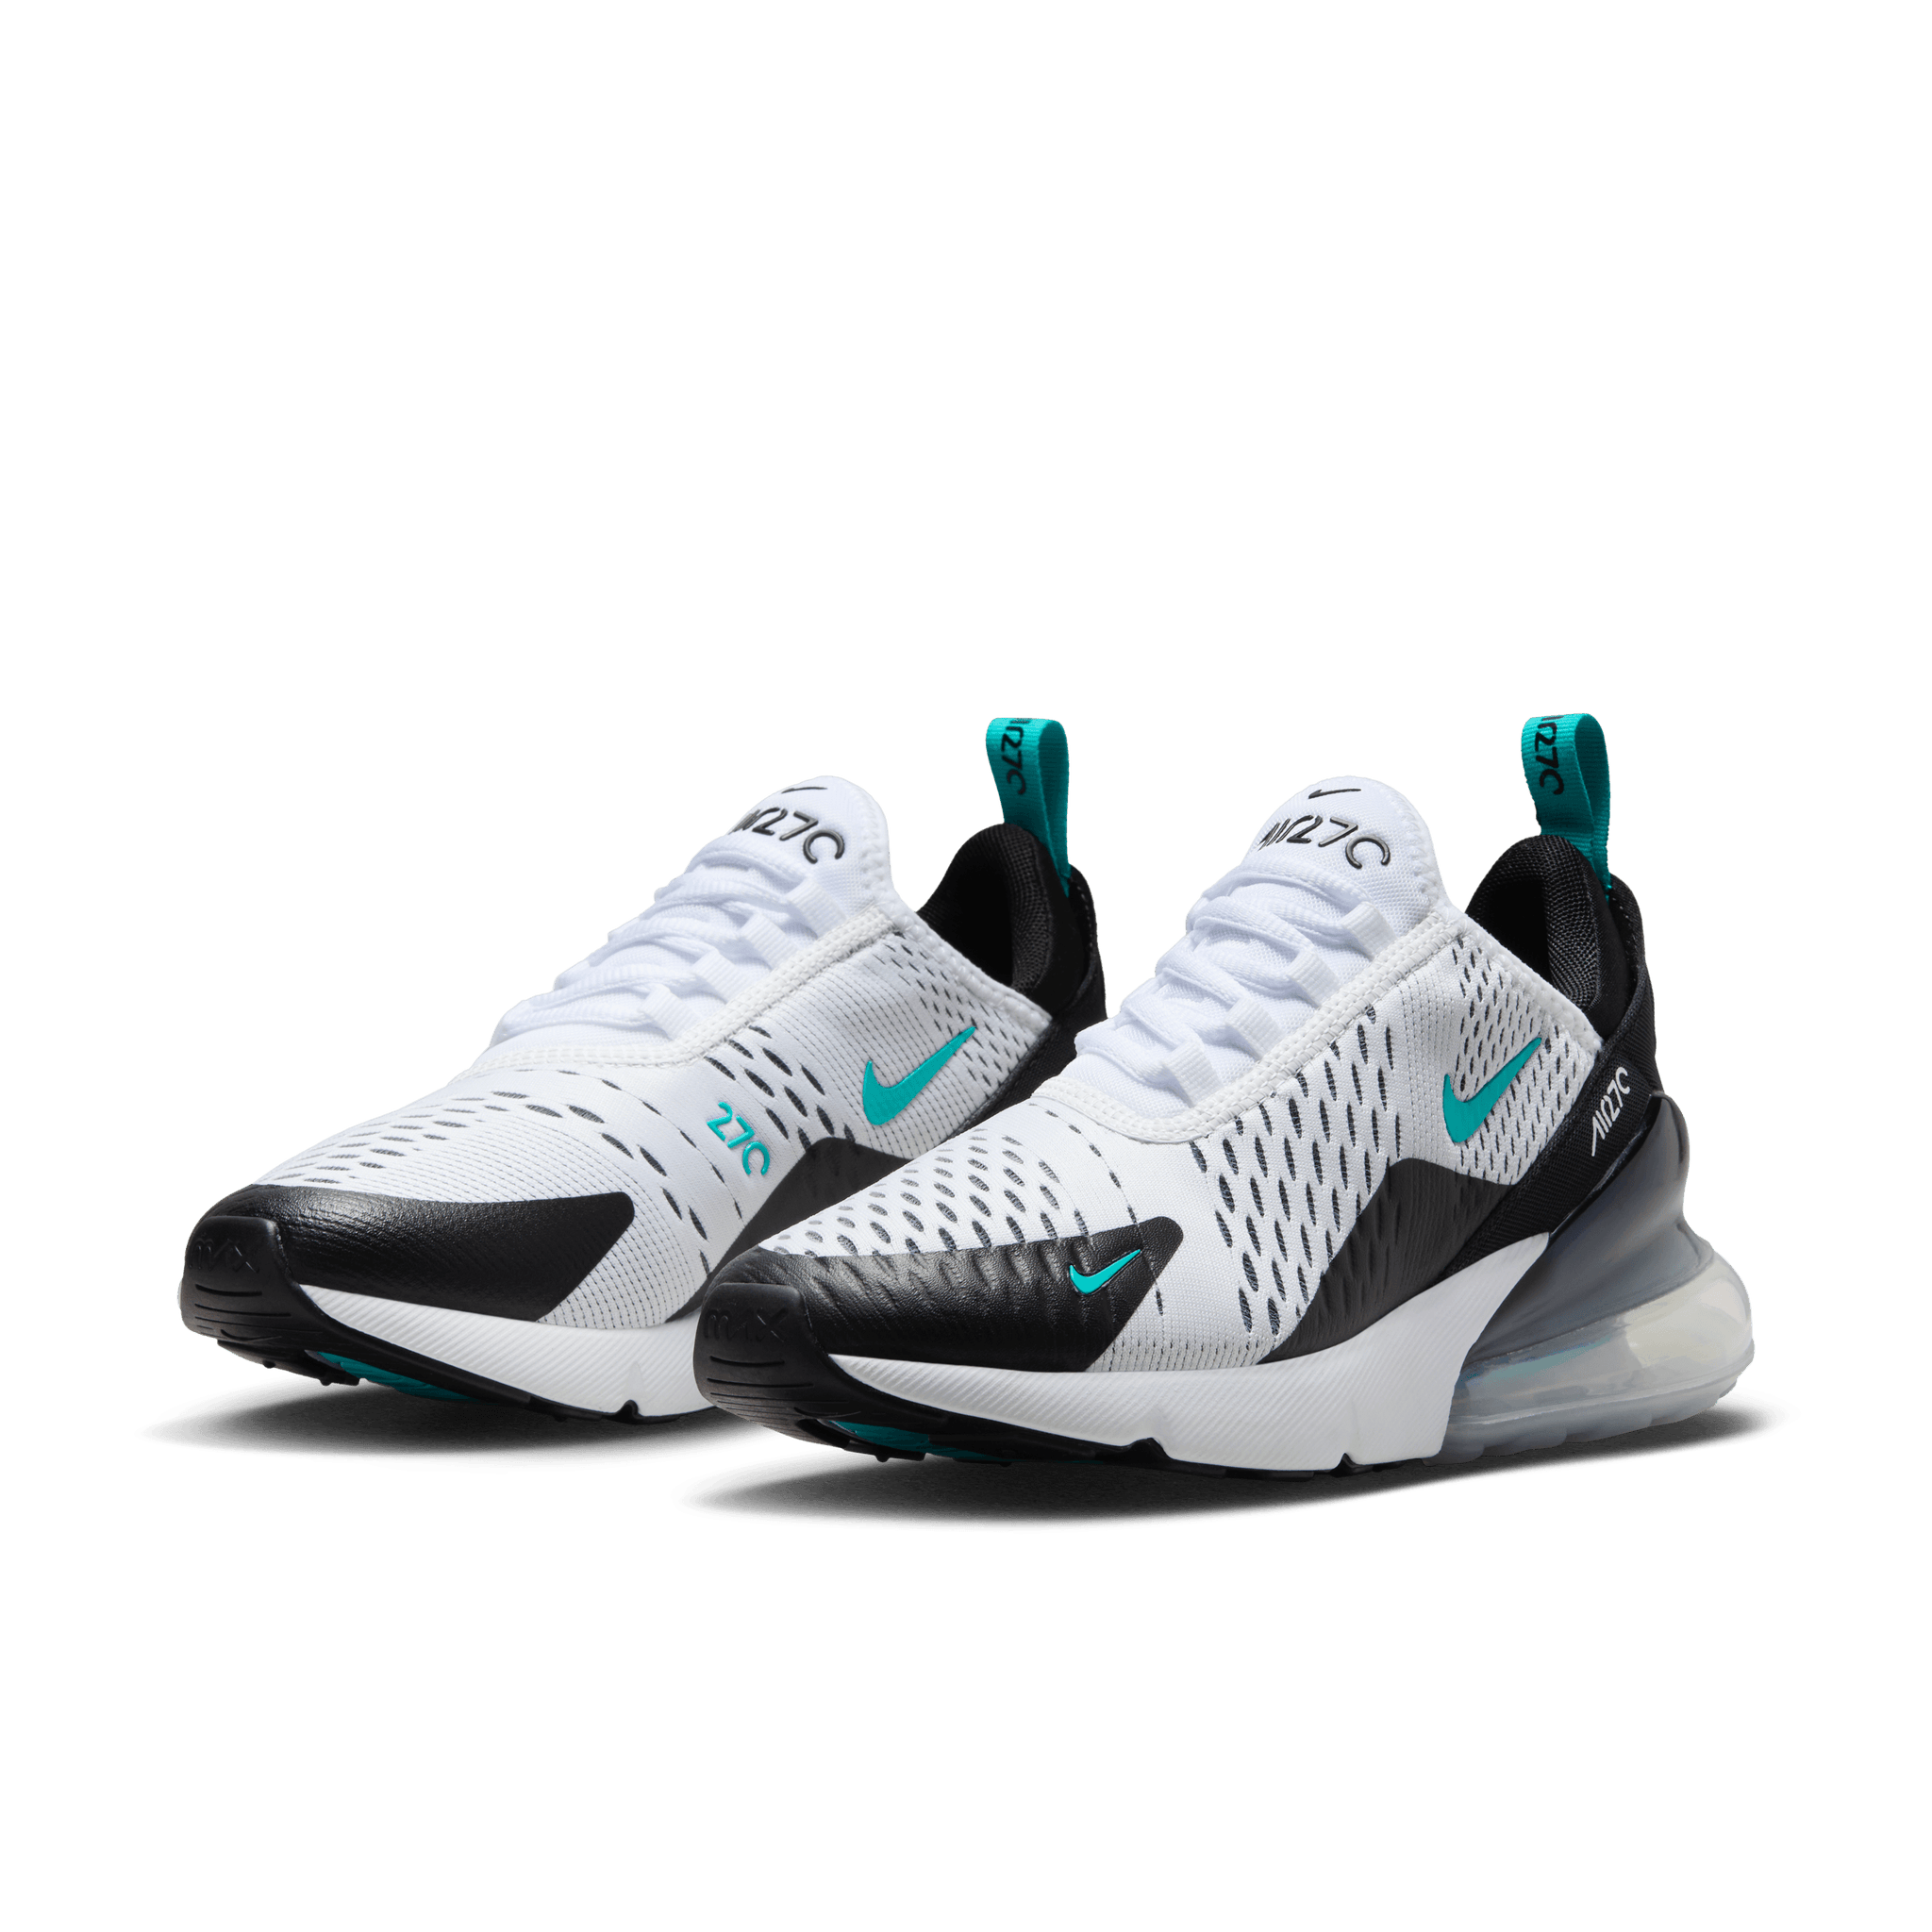 Nike Air Max 270 Sneakers in white and blue